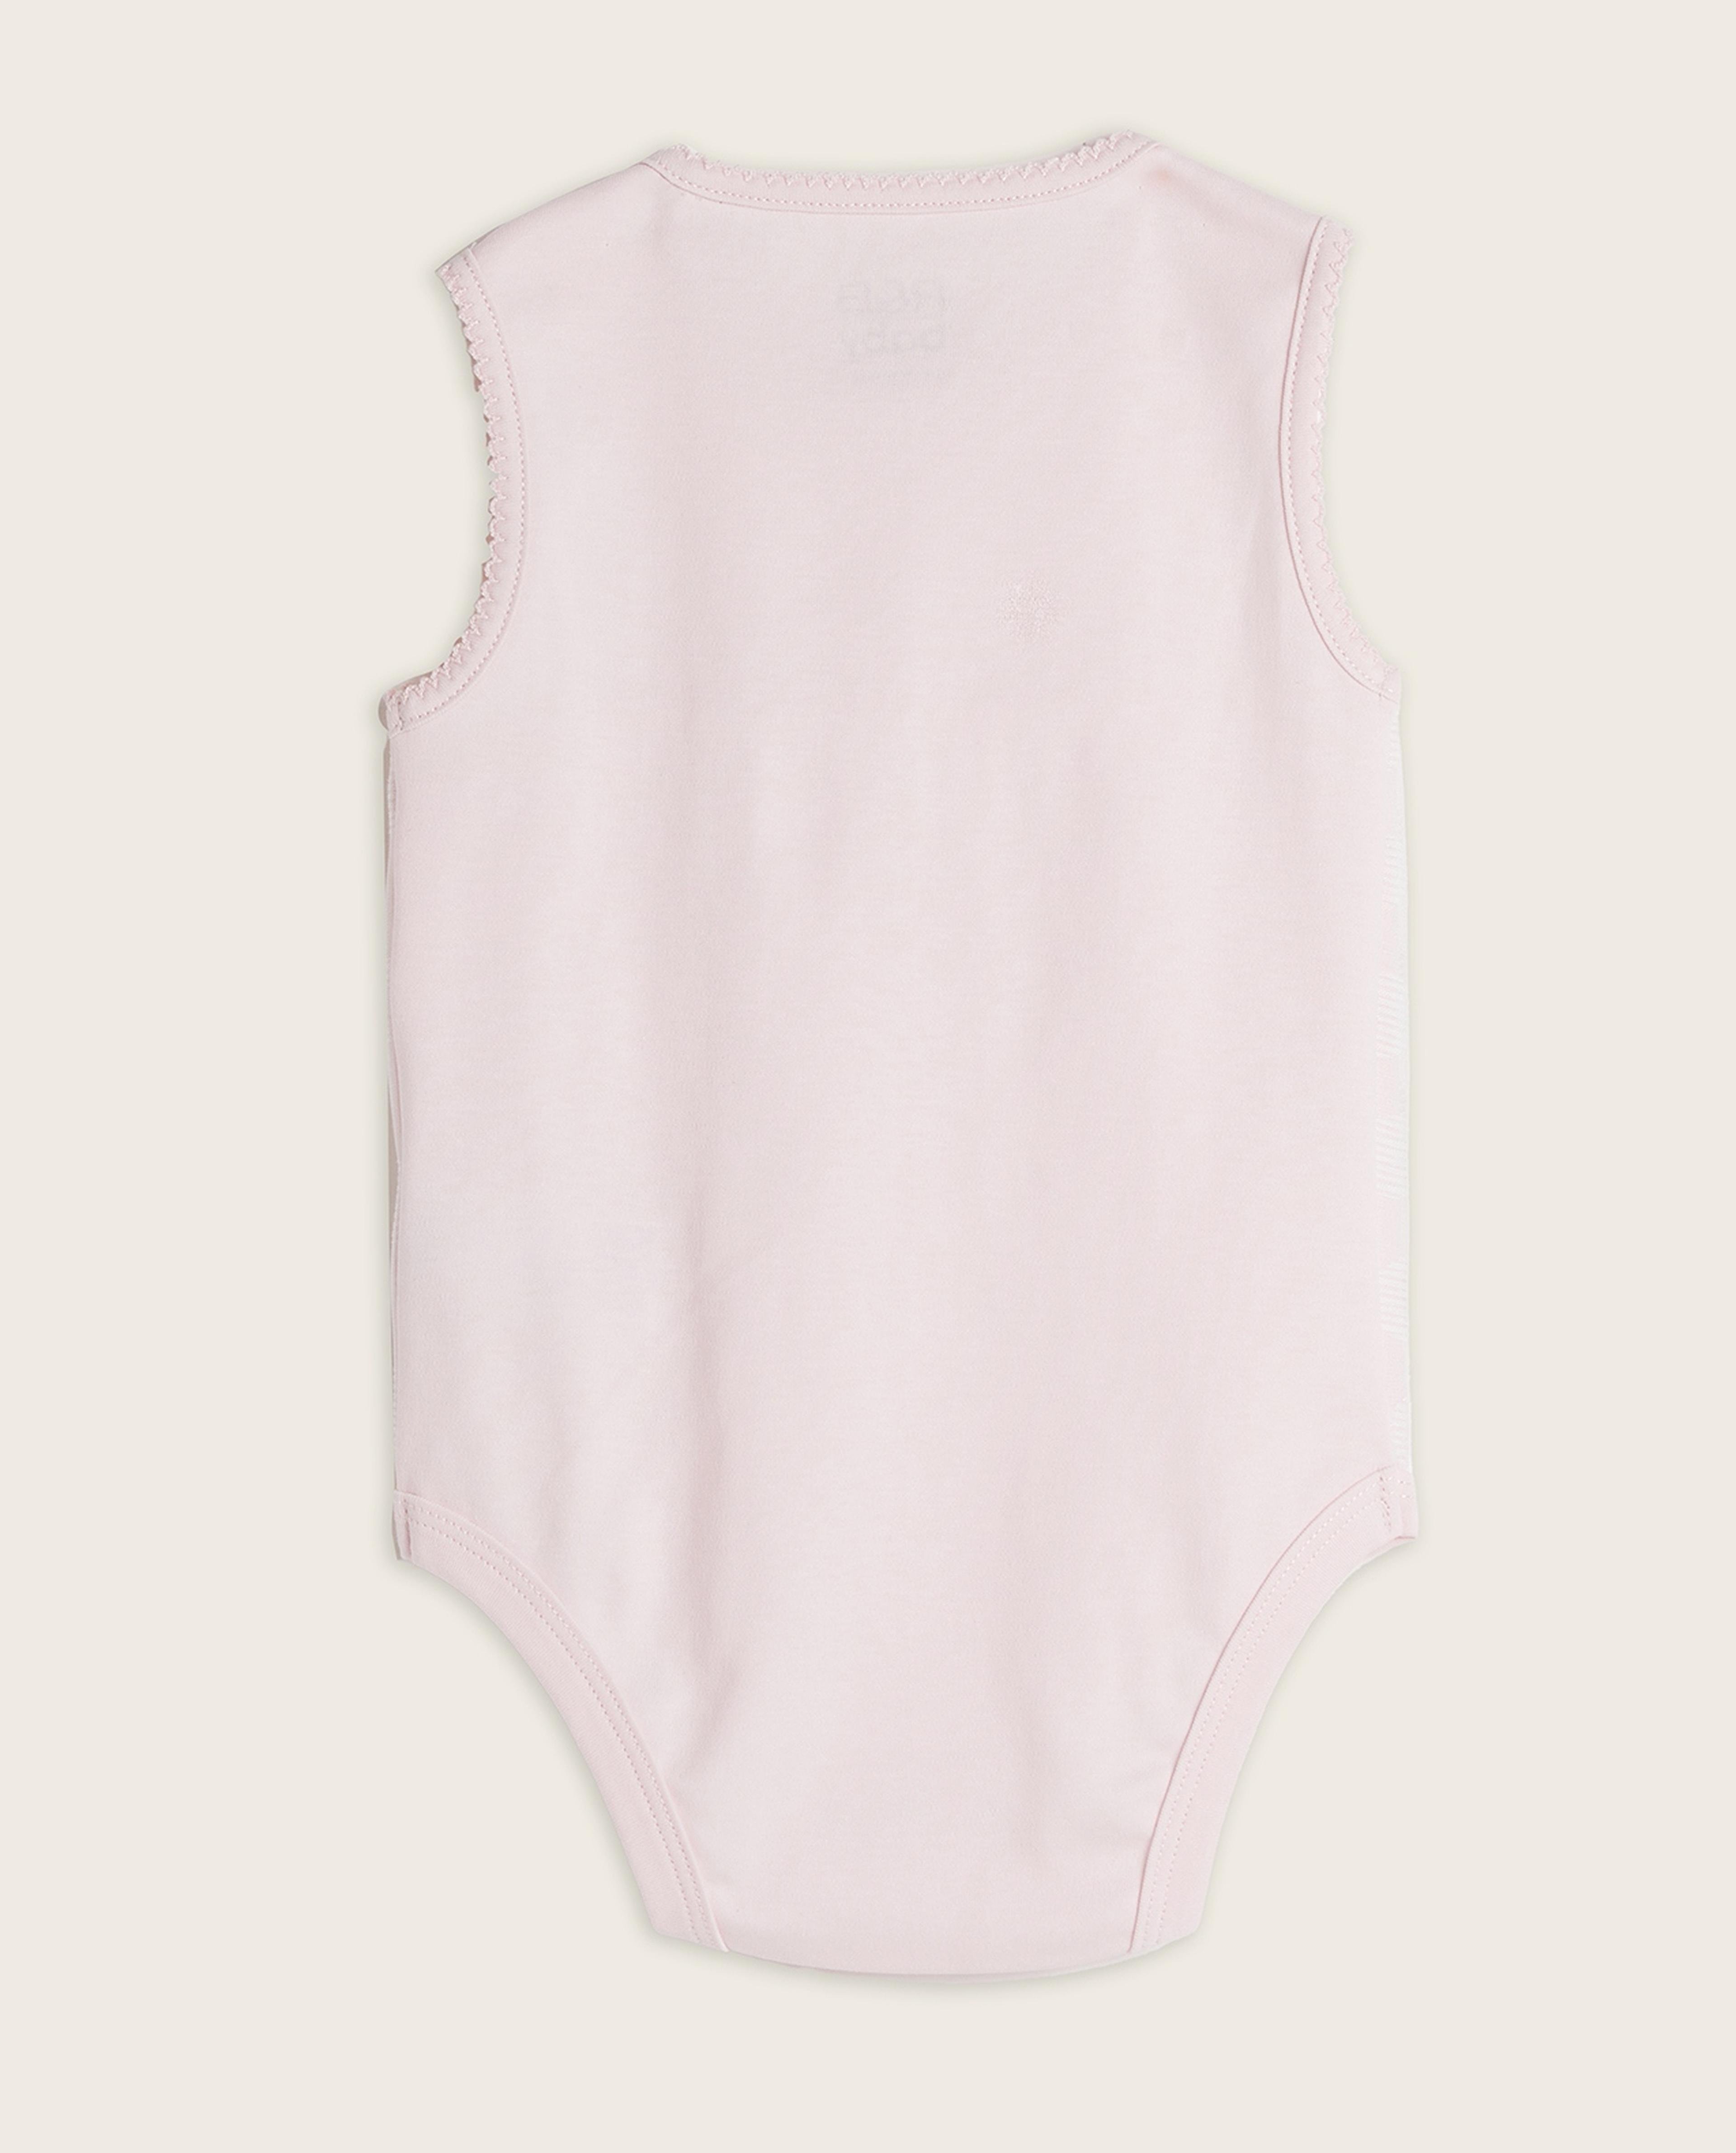 Self Patterned Sleeveless Bodysuit with Crew Neck